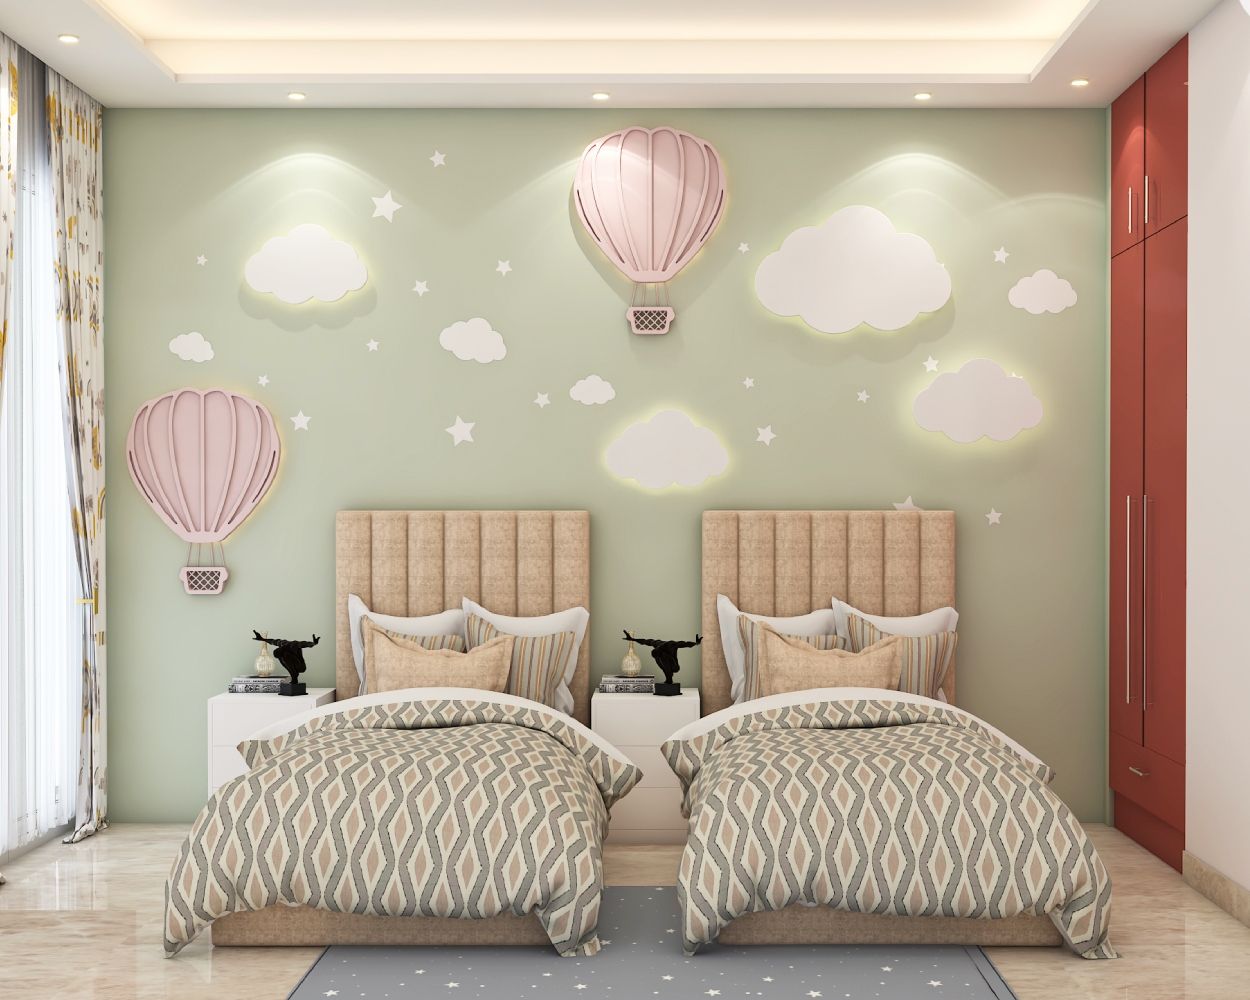 Modern Kids Room Design With Twin Beds And Beige Headboards